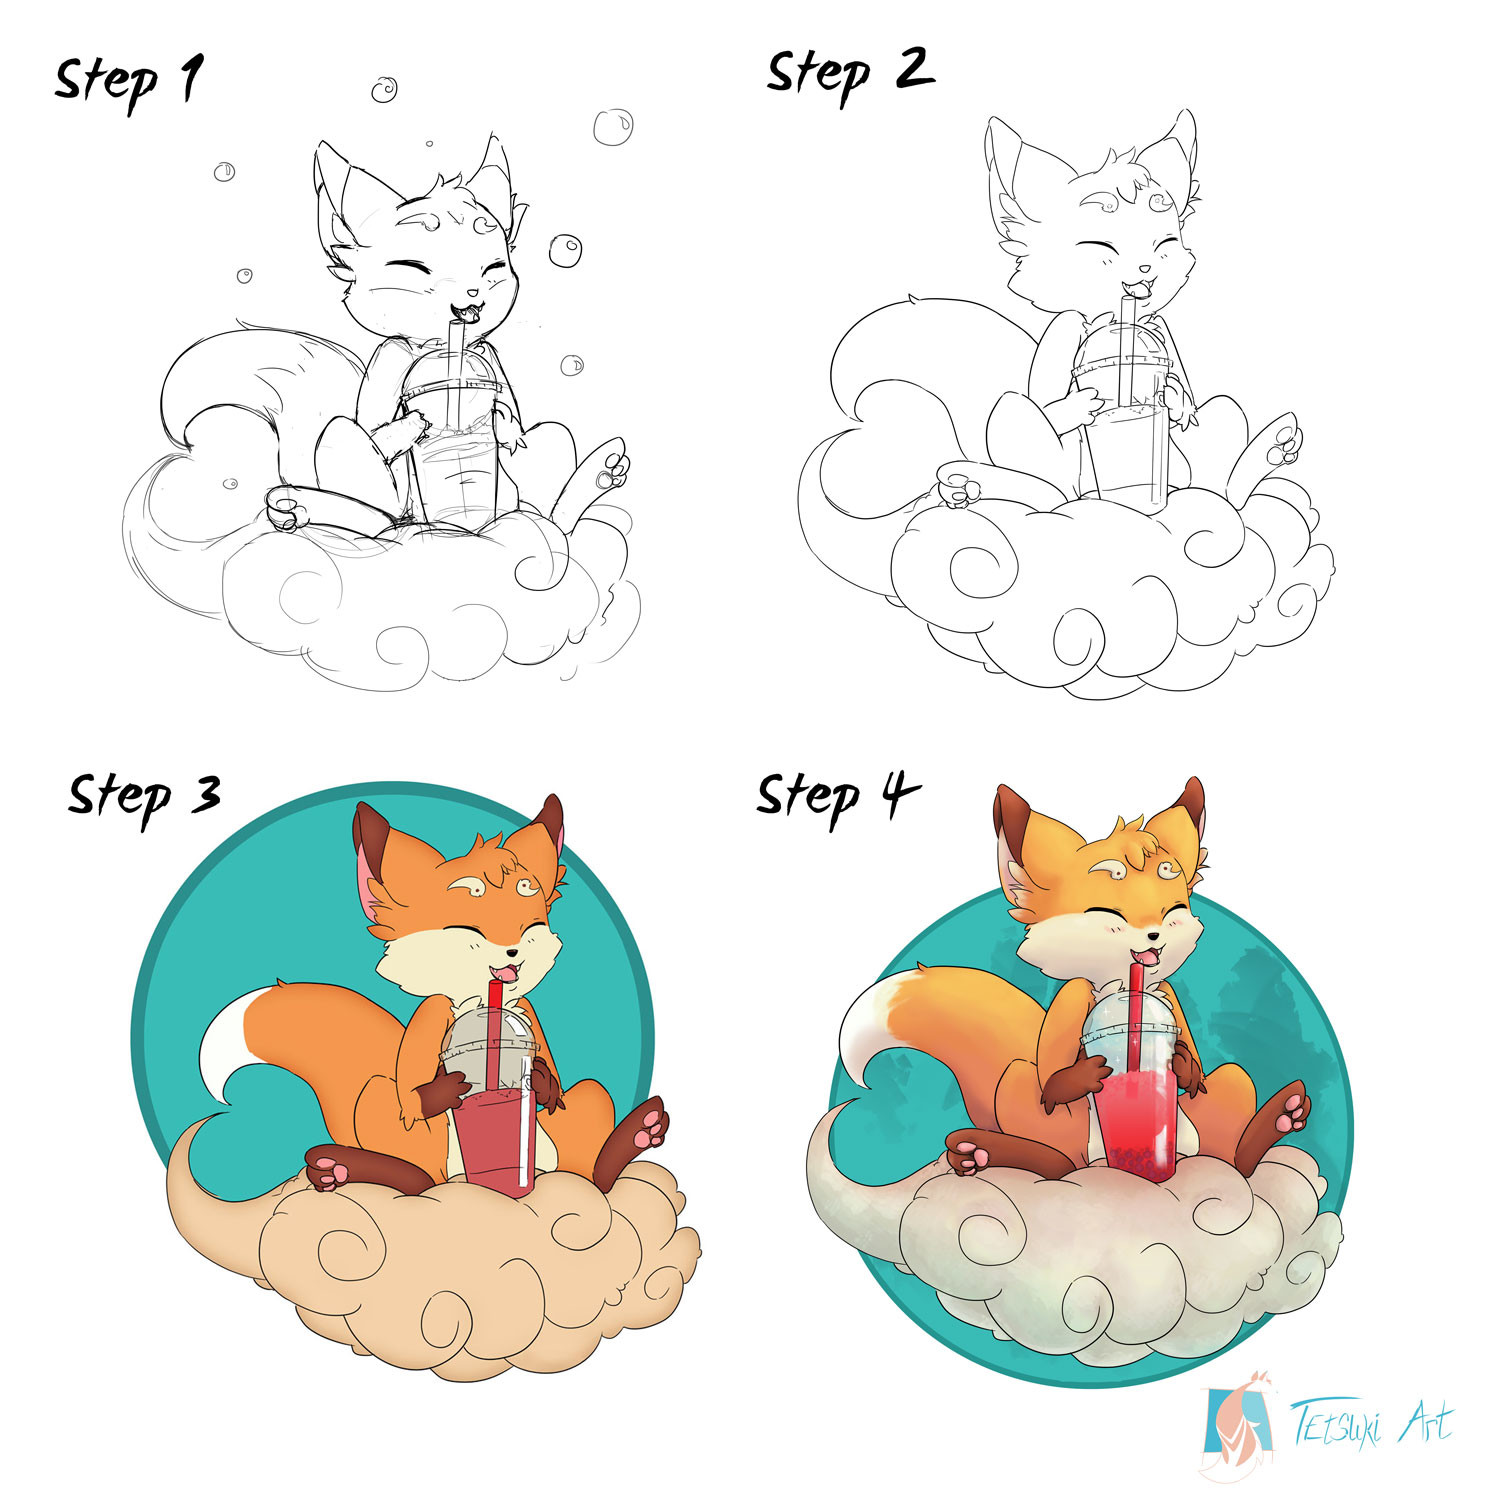 Step 1: Fast Sketch for concepts and idea
Step 2: Clean Line Art process after the sketch
Step 3: Flat Colors before the shading
Step 4: Final render